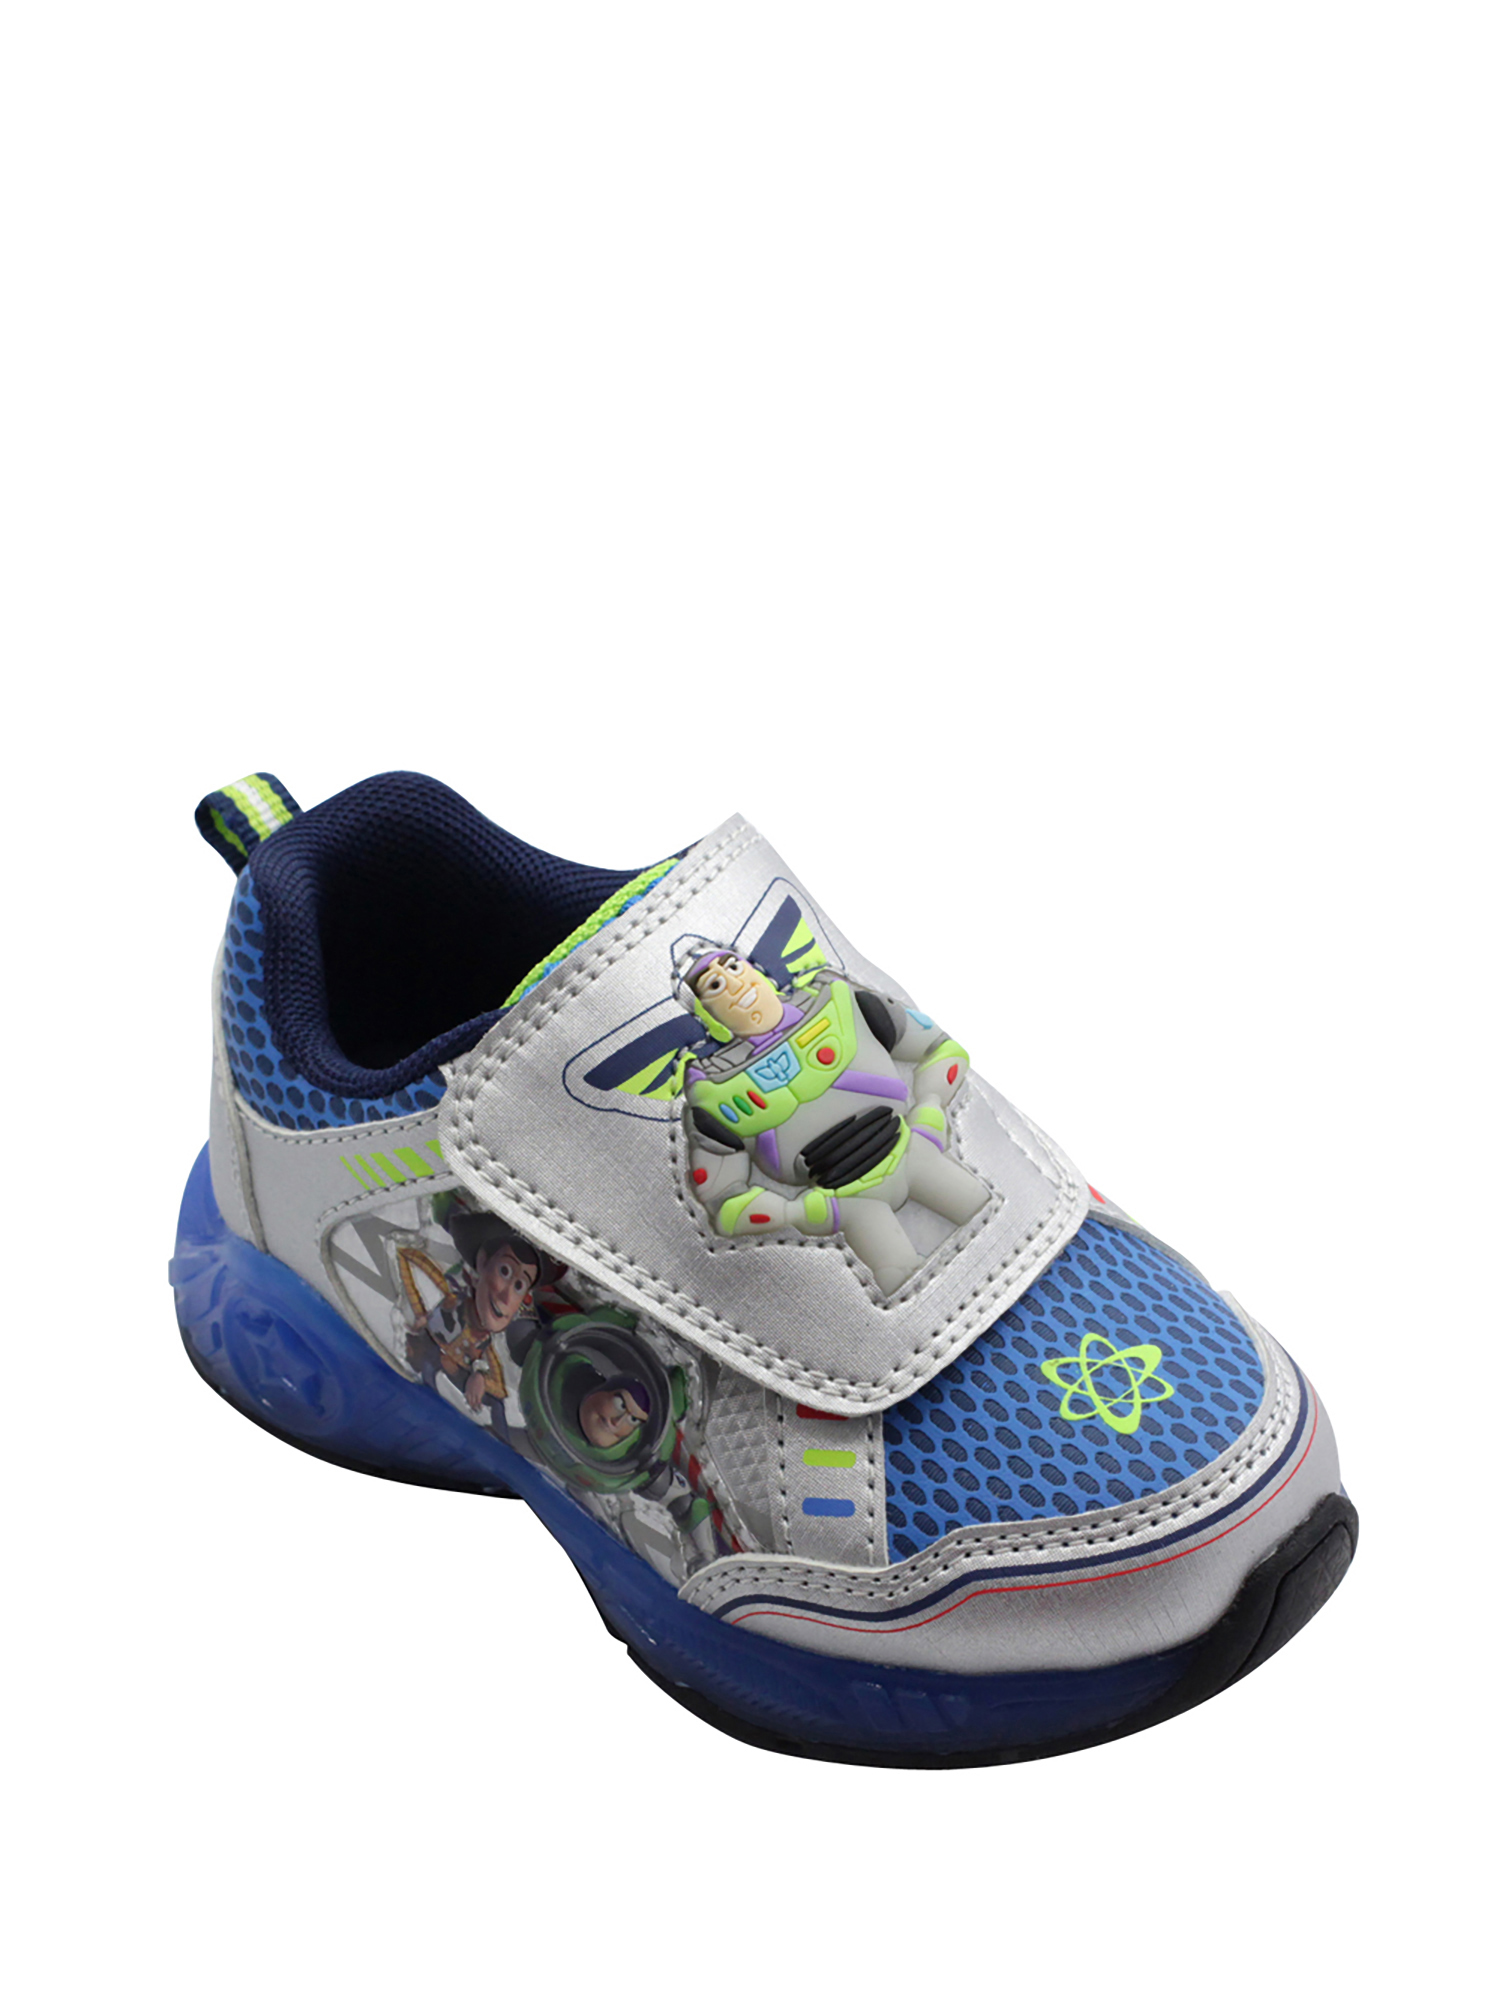 Toy Story-disney By Toy Story Athletic - image 1 of 5